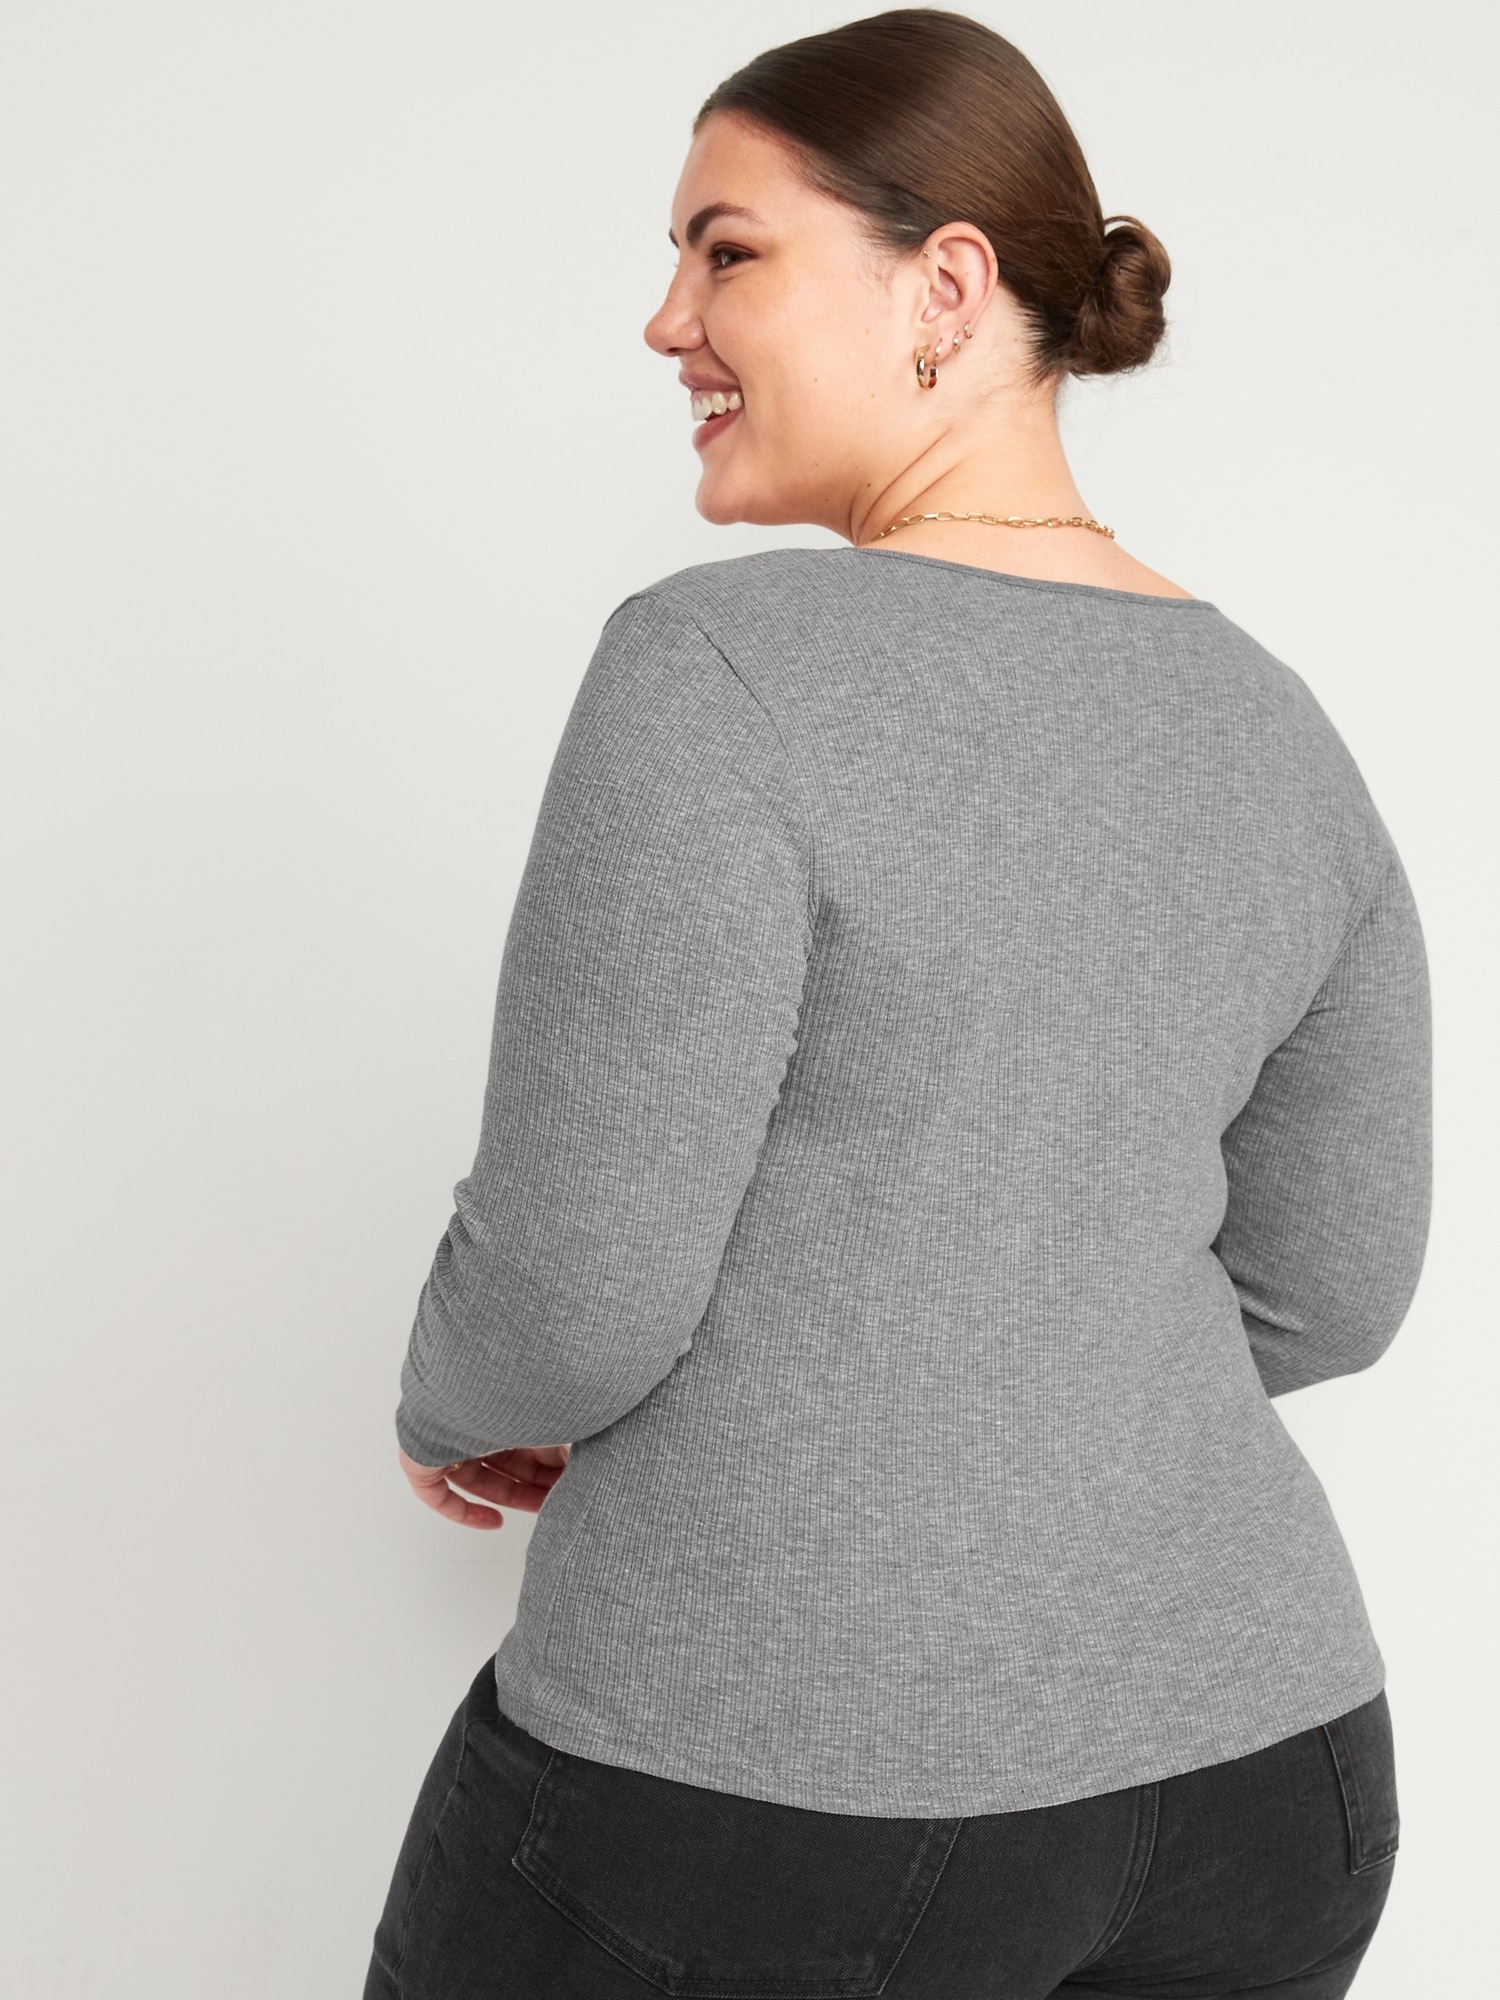 Long-Sleeve Cinched-Front Rib-Knit T-Shirt for Women | Old Navy